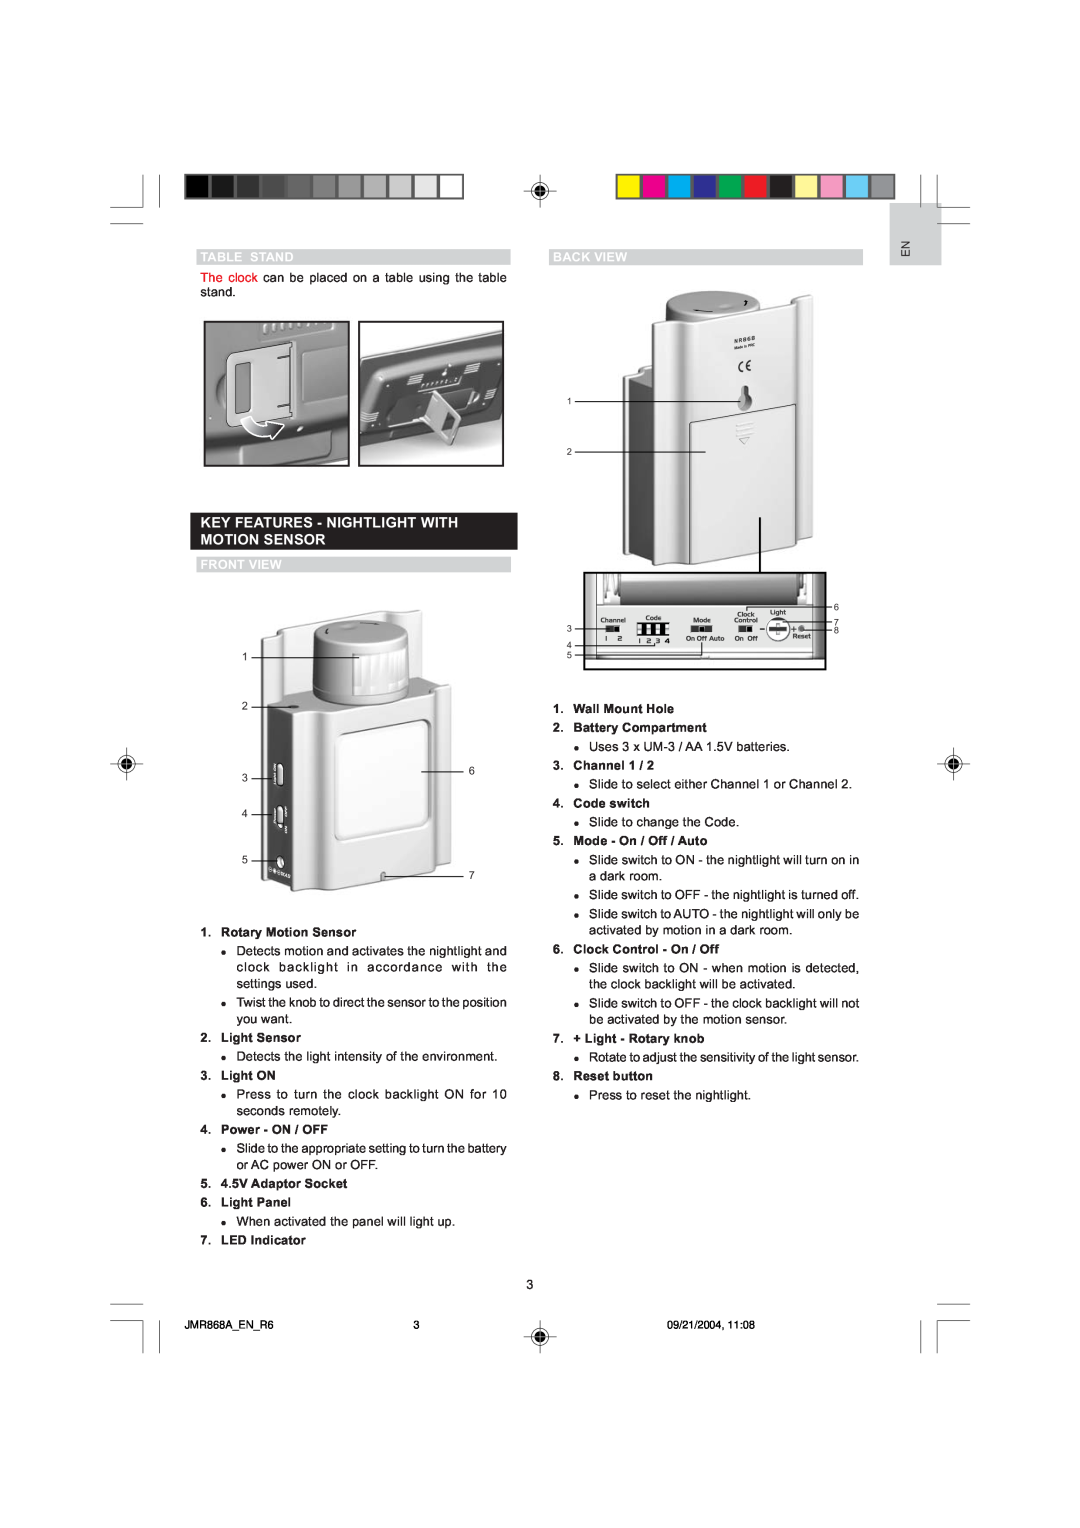 Oregon Scientific JMR868A user manual Key Features - Nightlight With Motion Sensor, Table Stand, Front View, Back View 